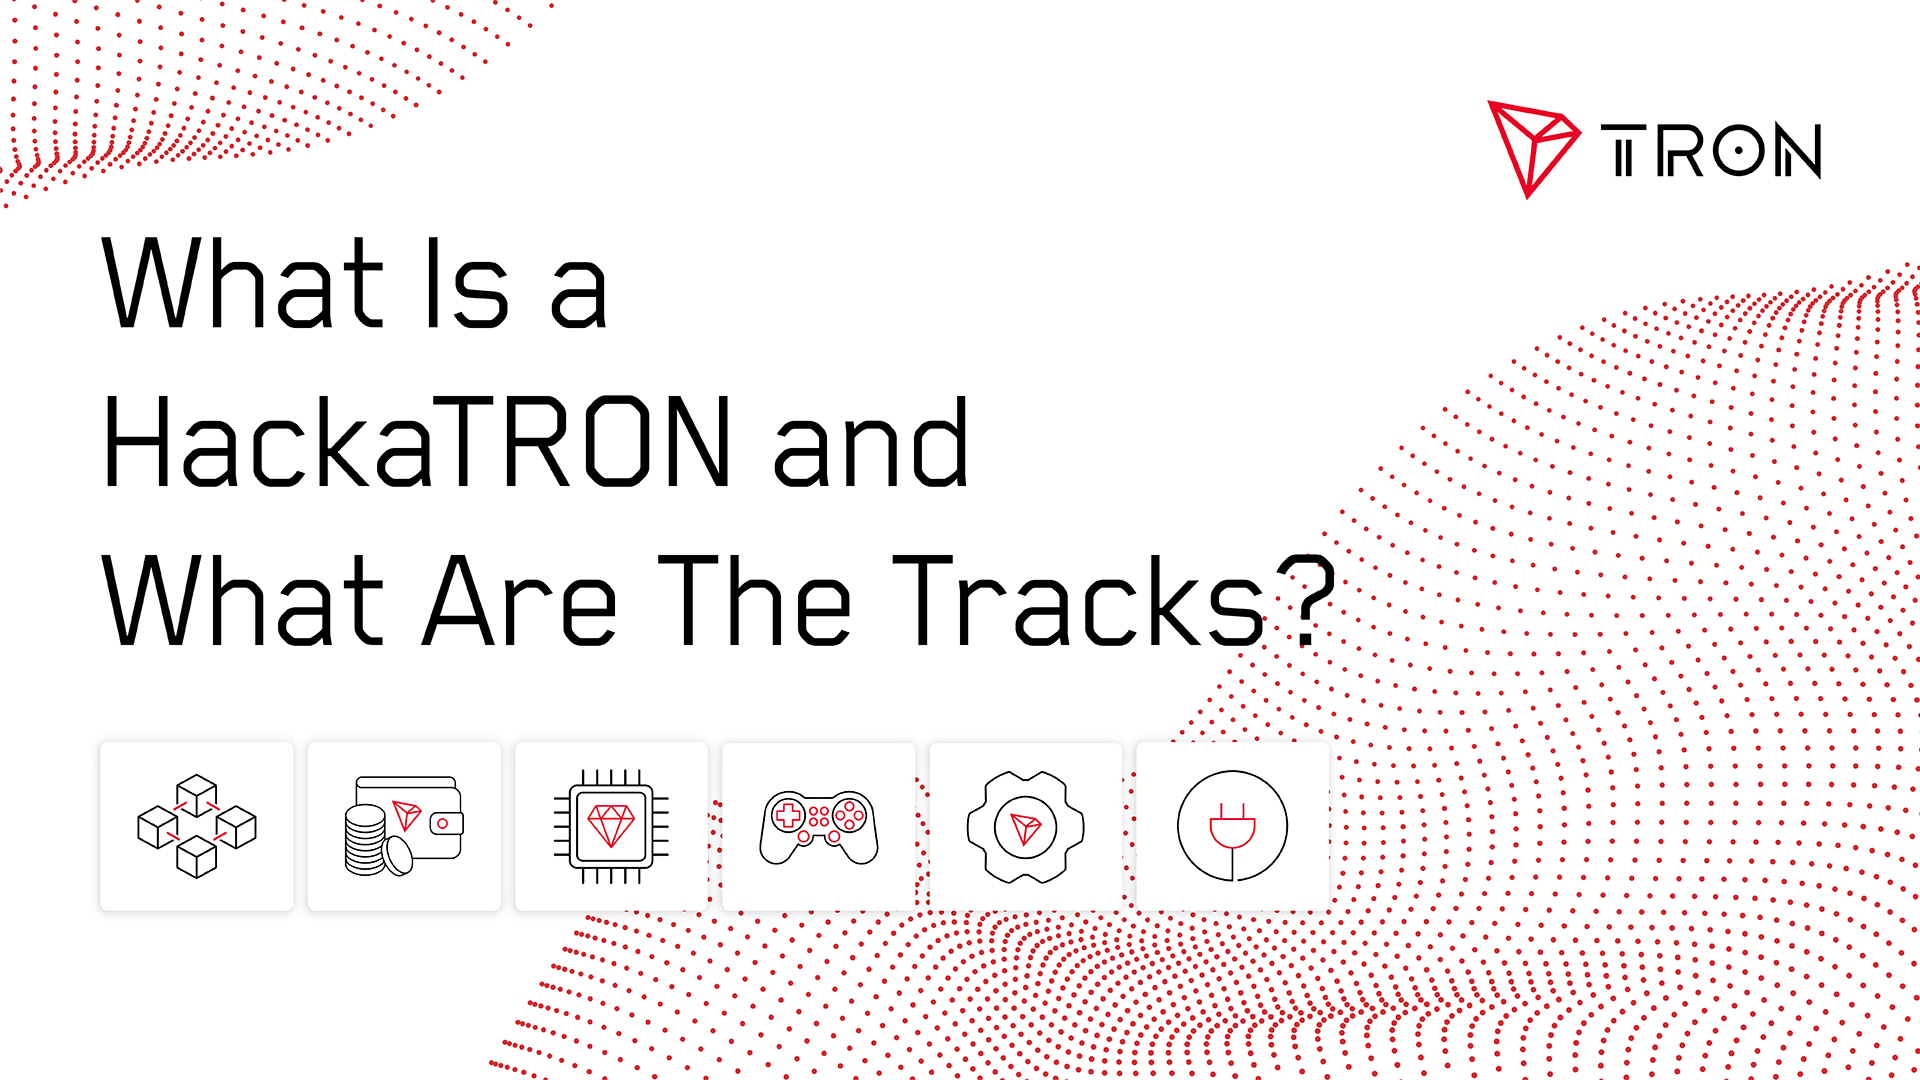 What Is a HackaTRON and What Are the Tracks?